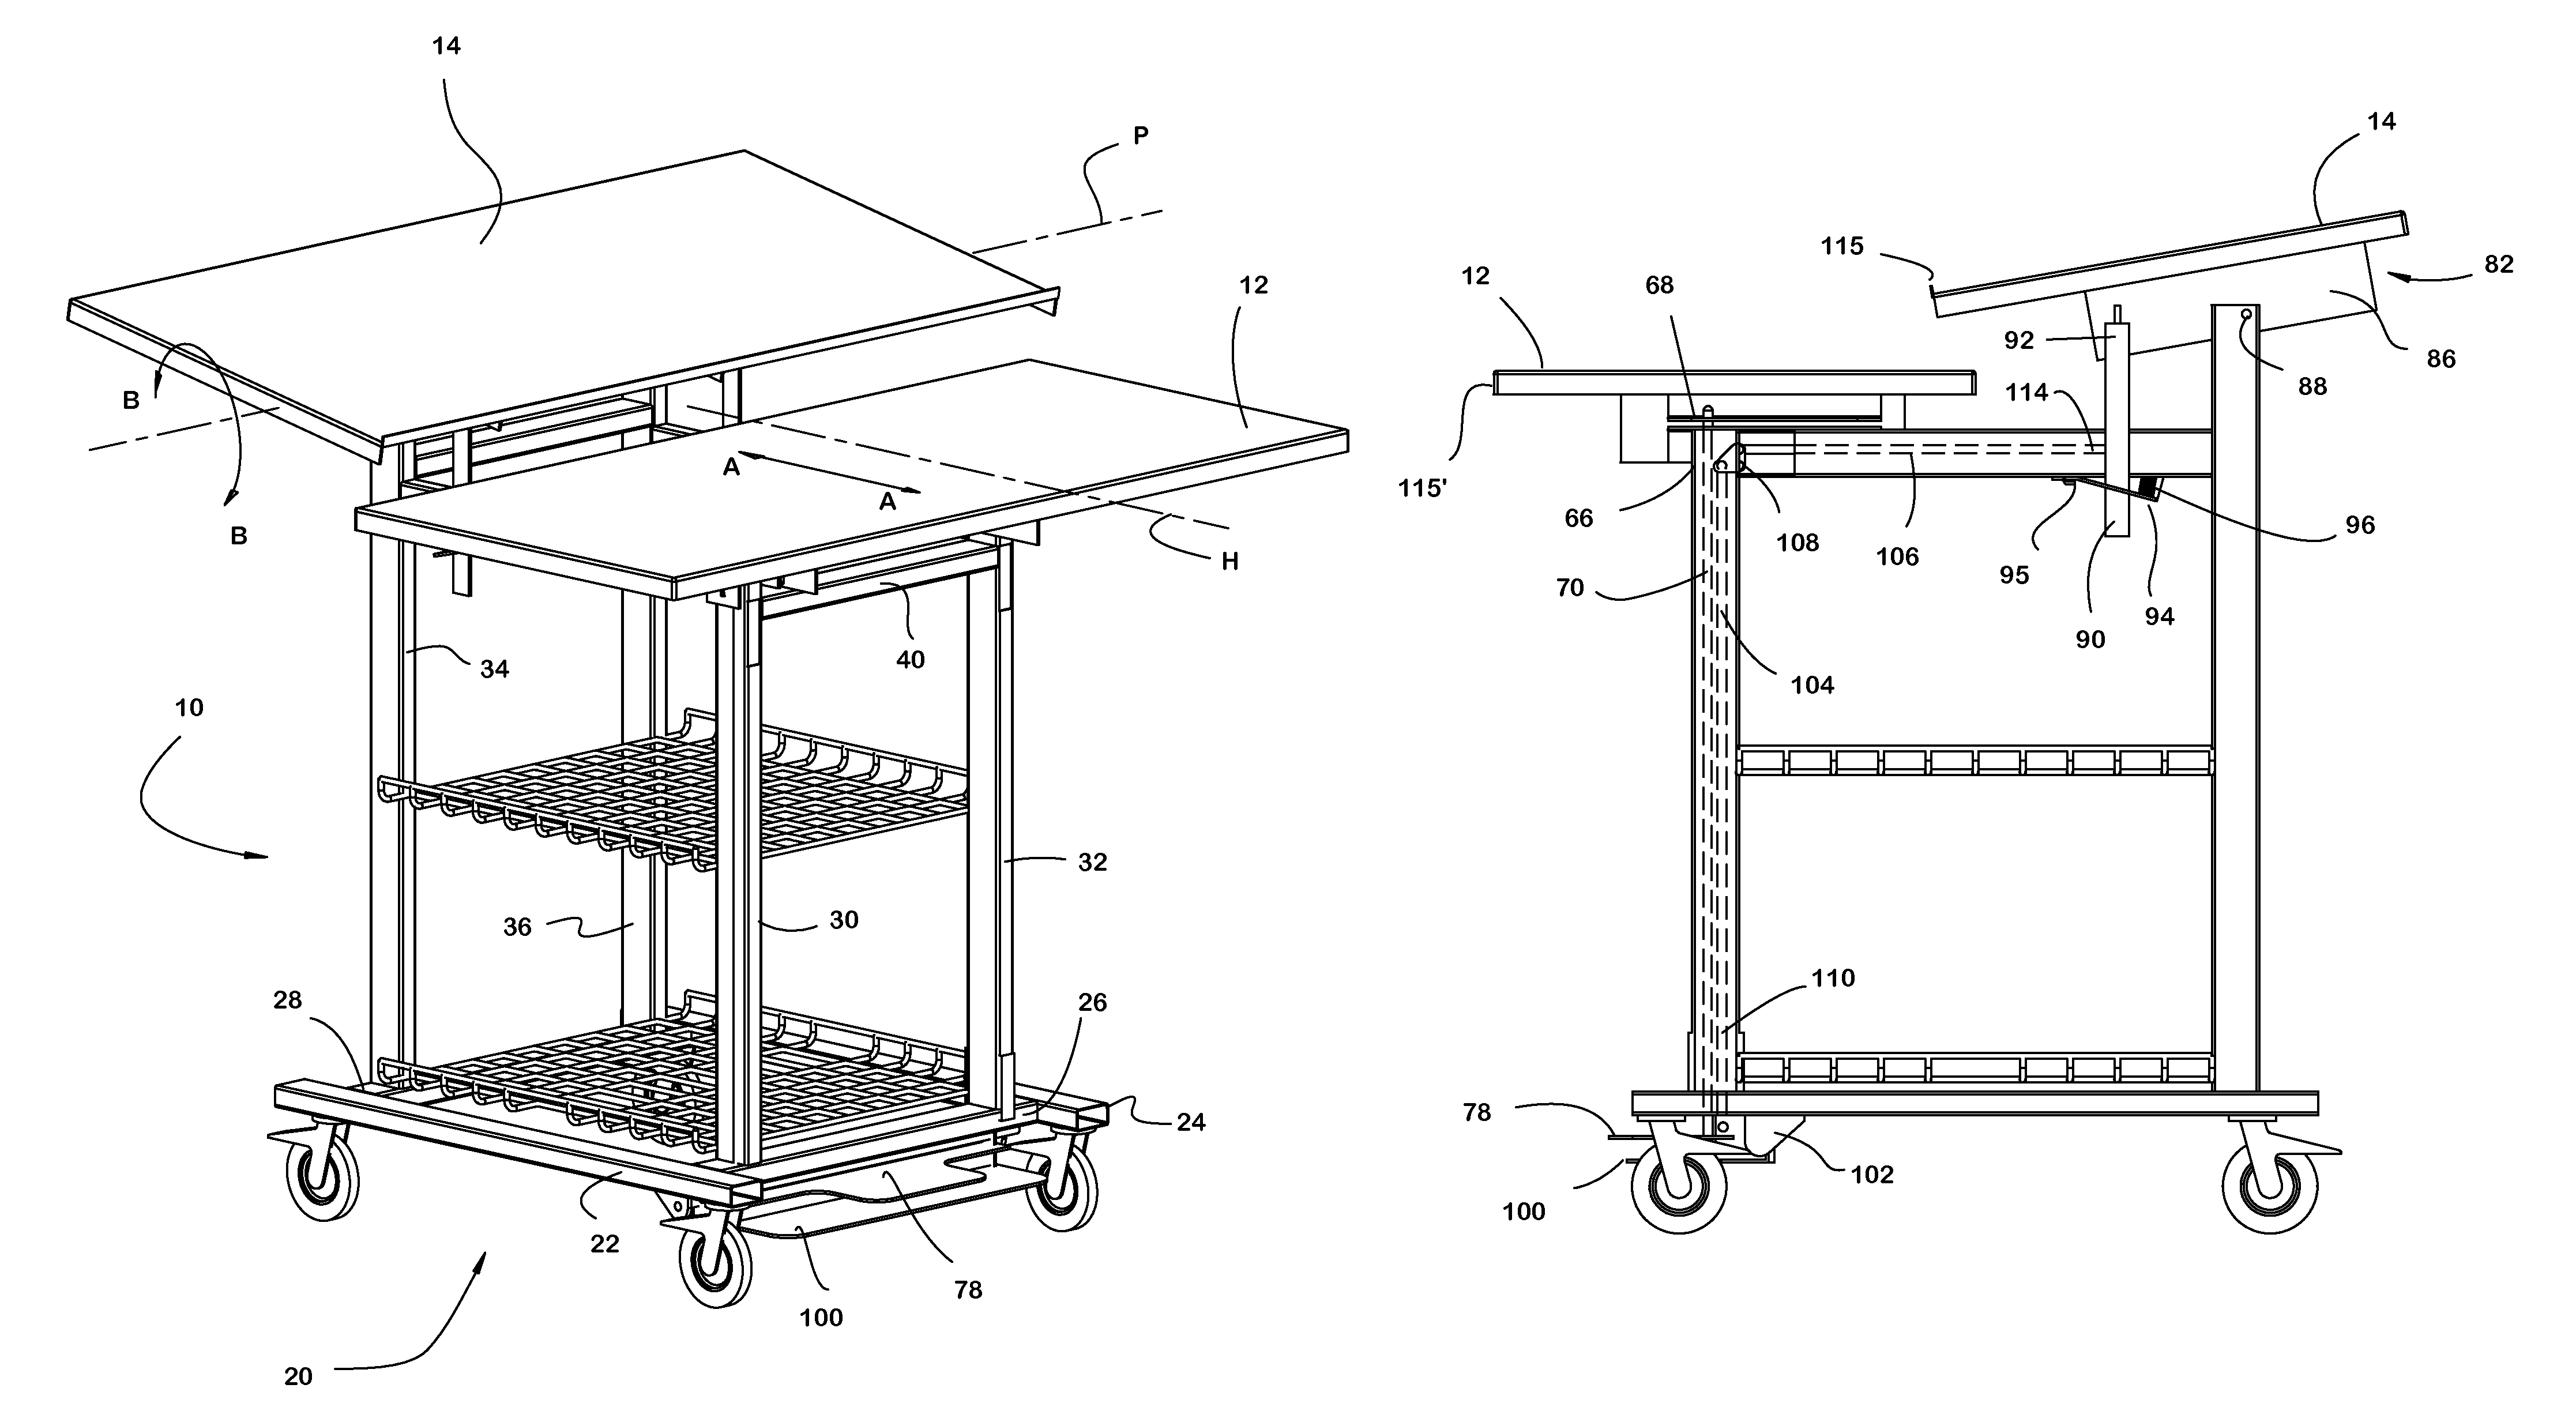 Adjustable bi-level surgical accessory table